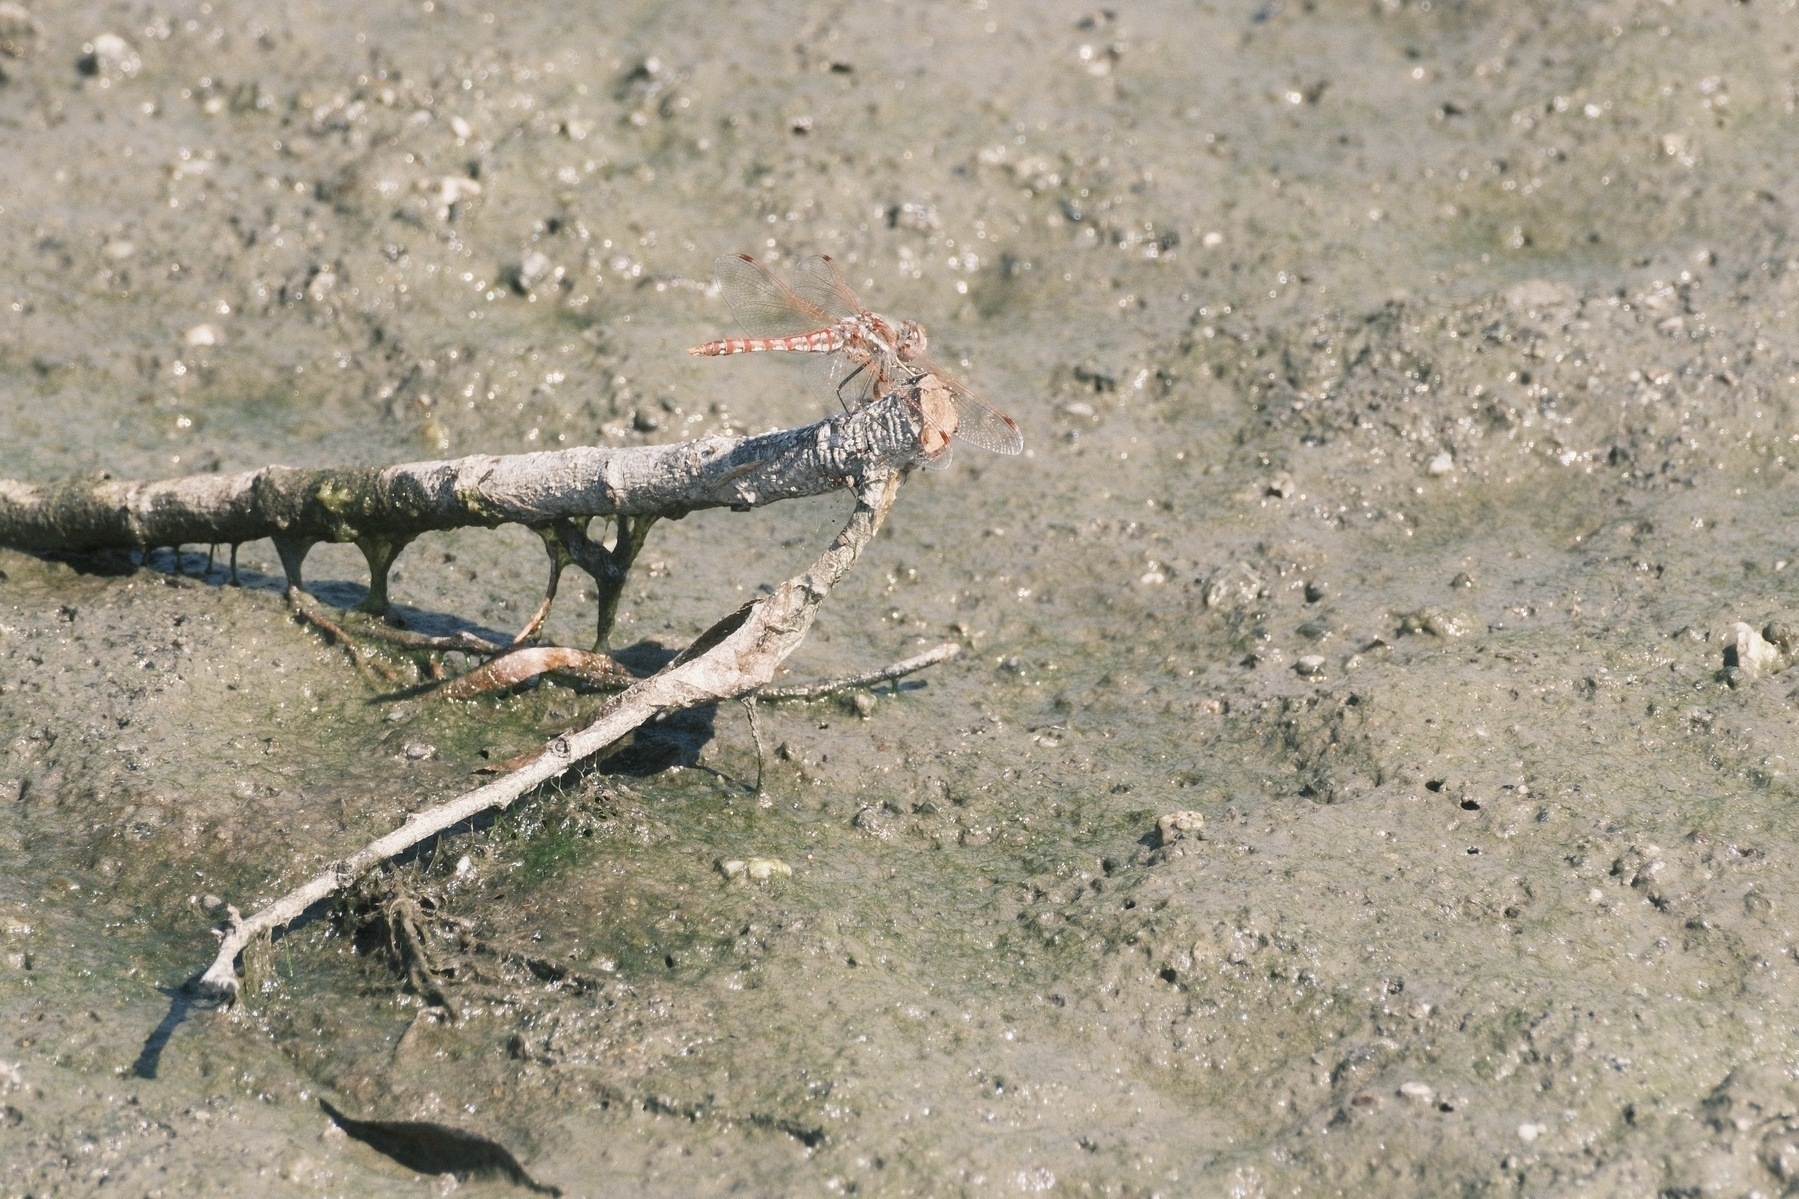 Within a muddy area with green algae, a stick juts out and a red striped dragonfly rests at the stick's end. The insect has red patches at the ends of its transparent wings.